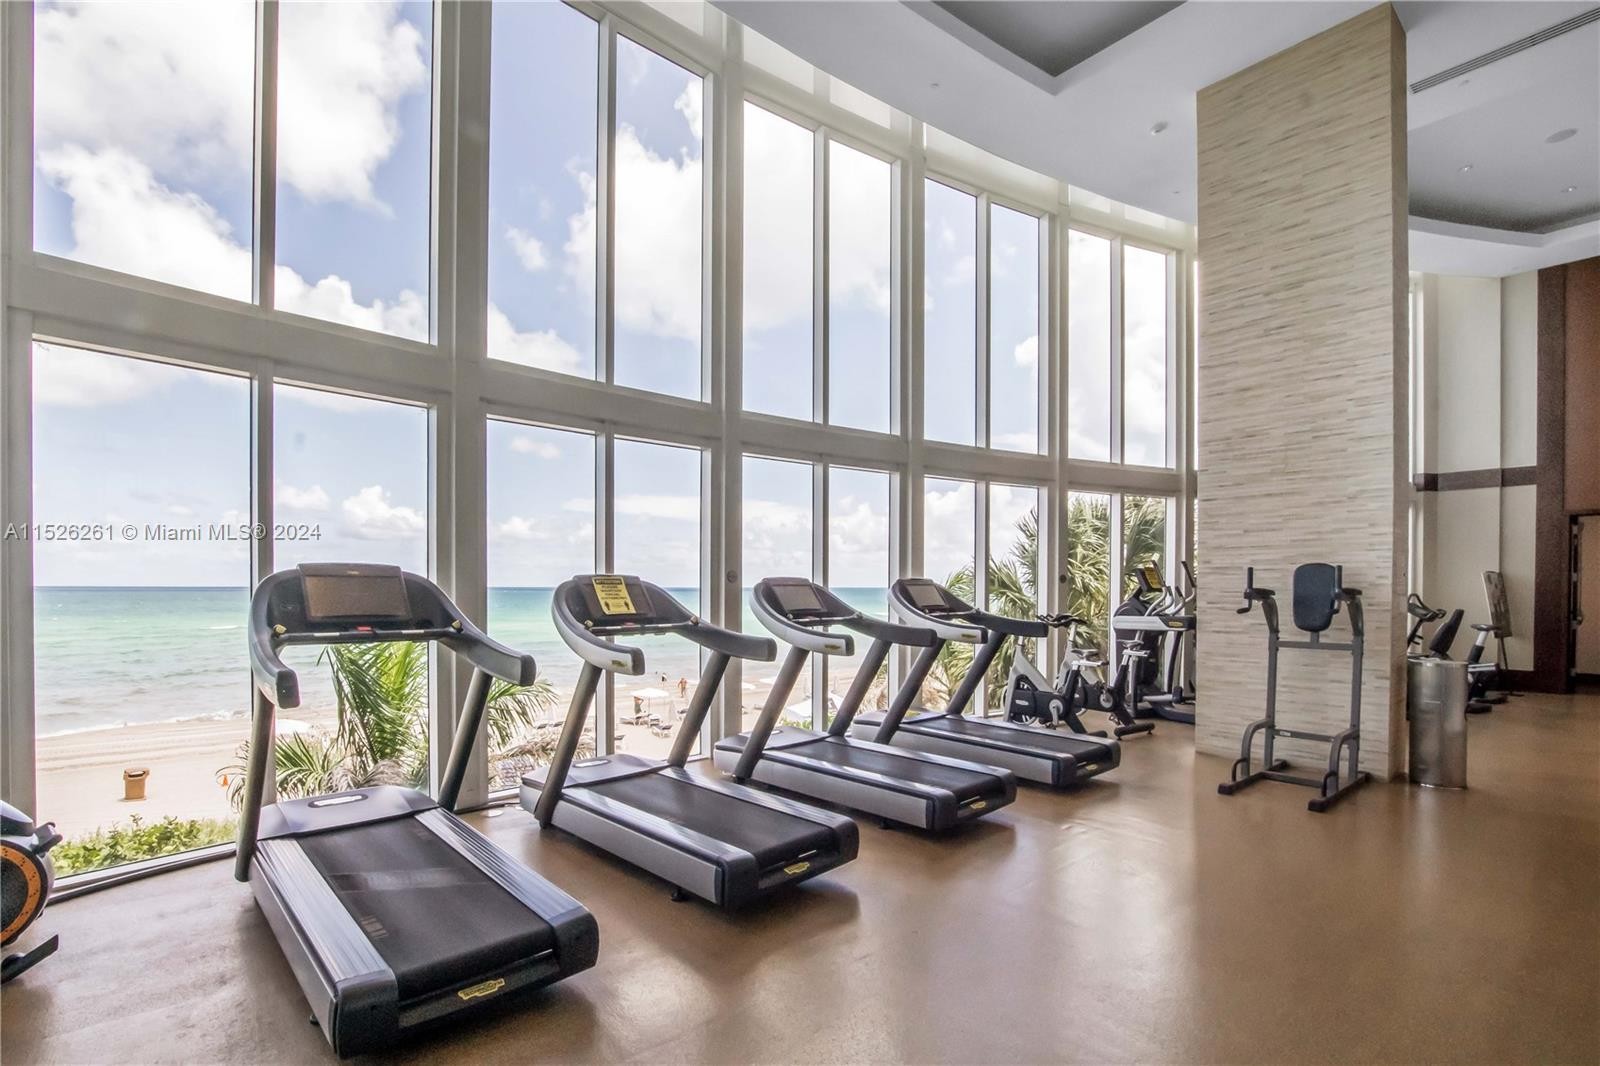 8. 15901 Collins Ave (Avail 5/1-11/15)